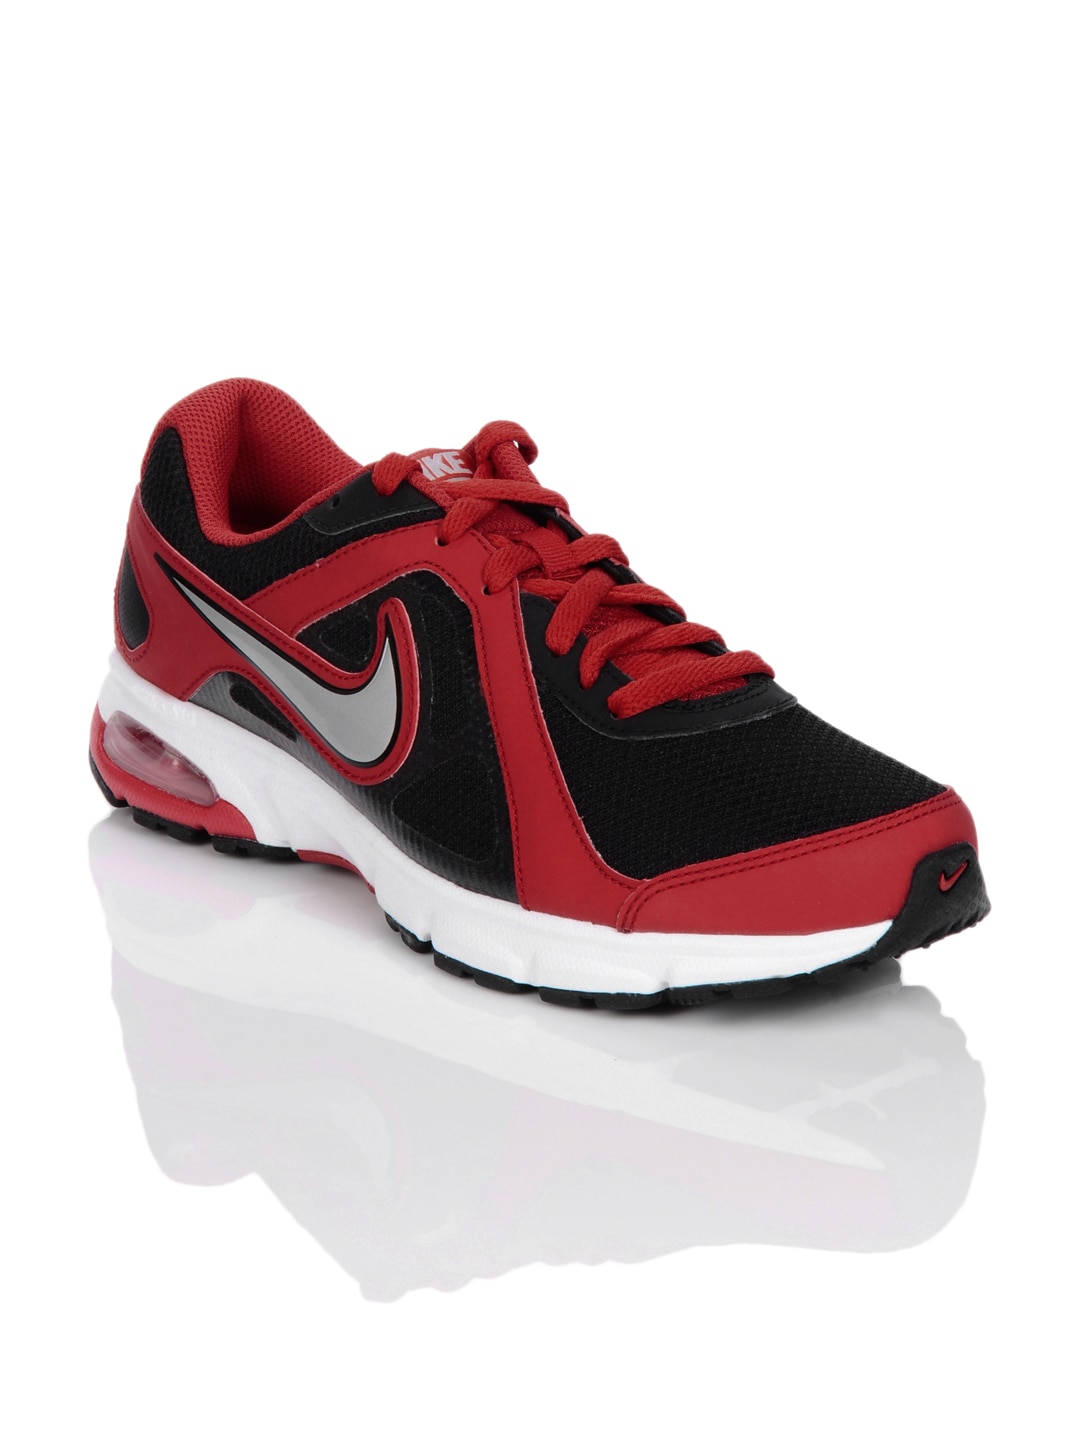 Nike Men Air Dictate 2 MSL Red Sports Shoes